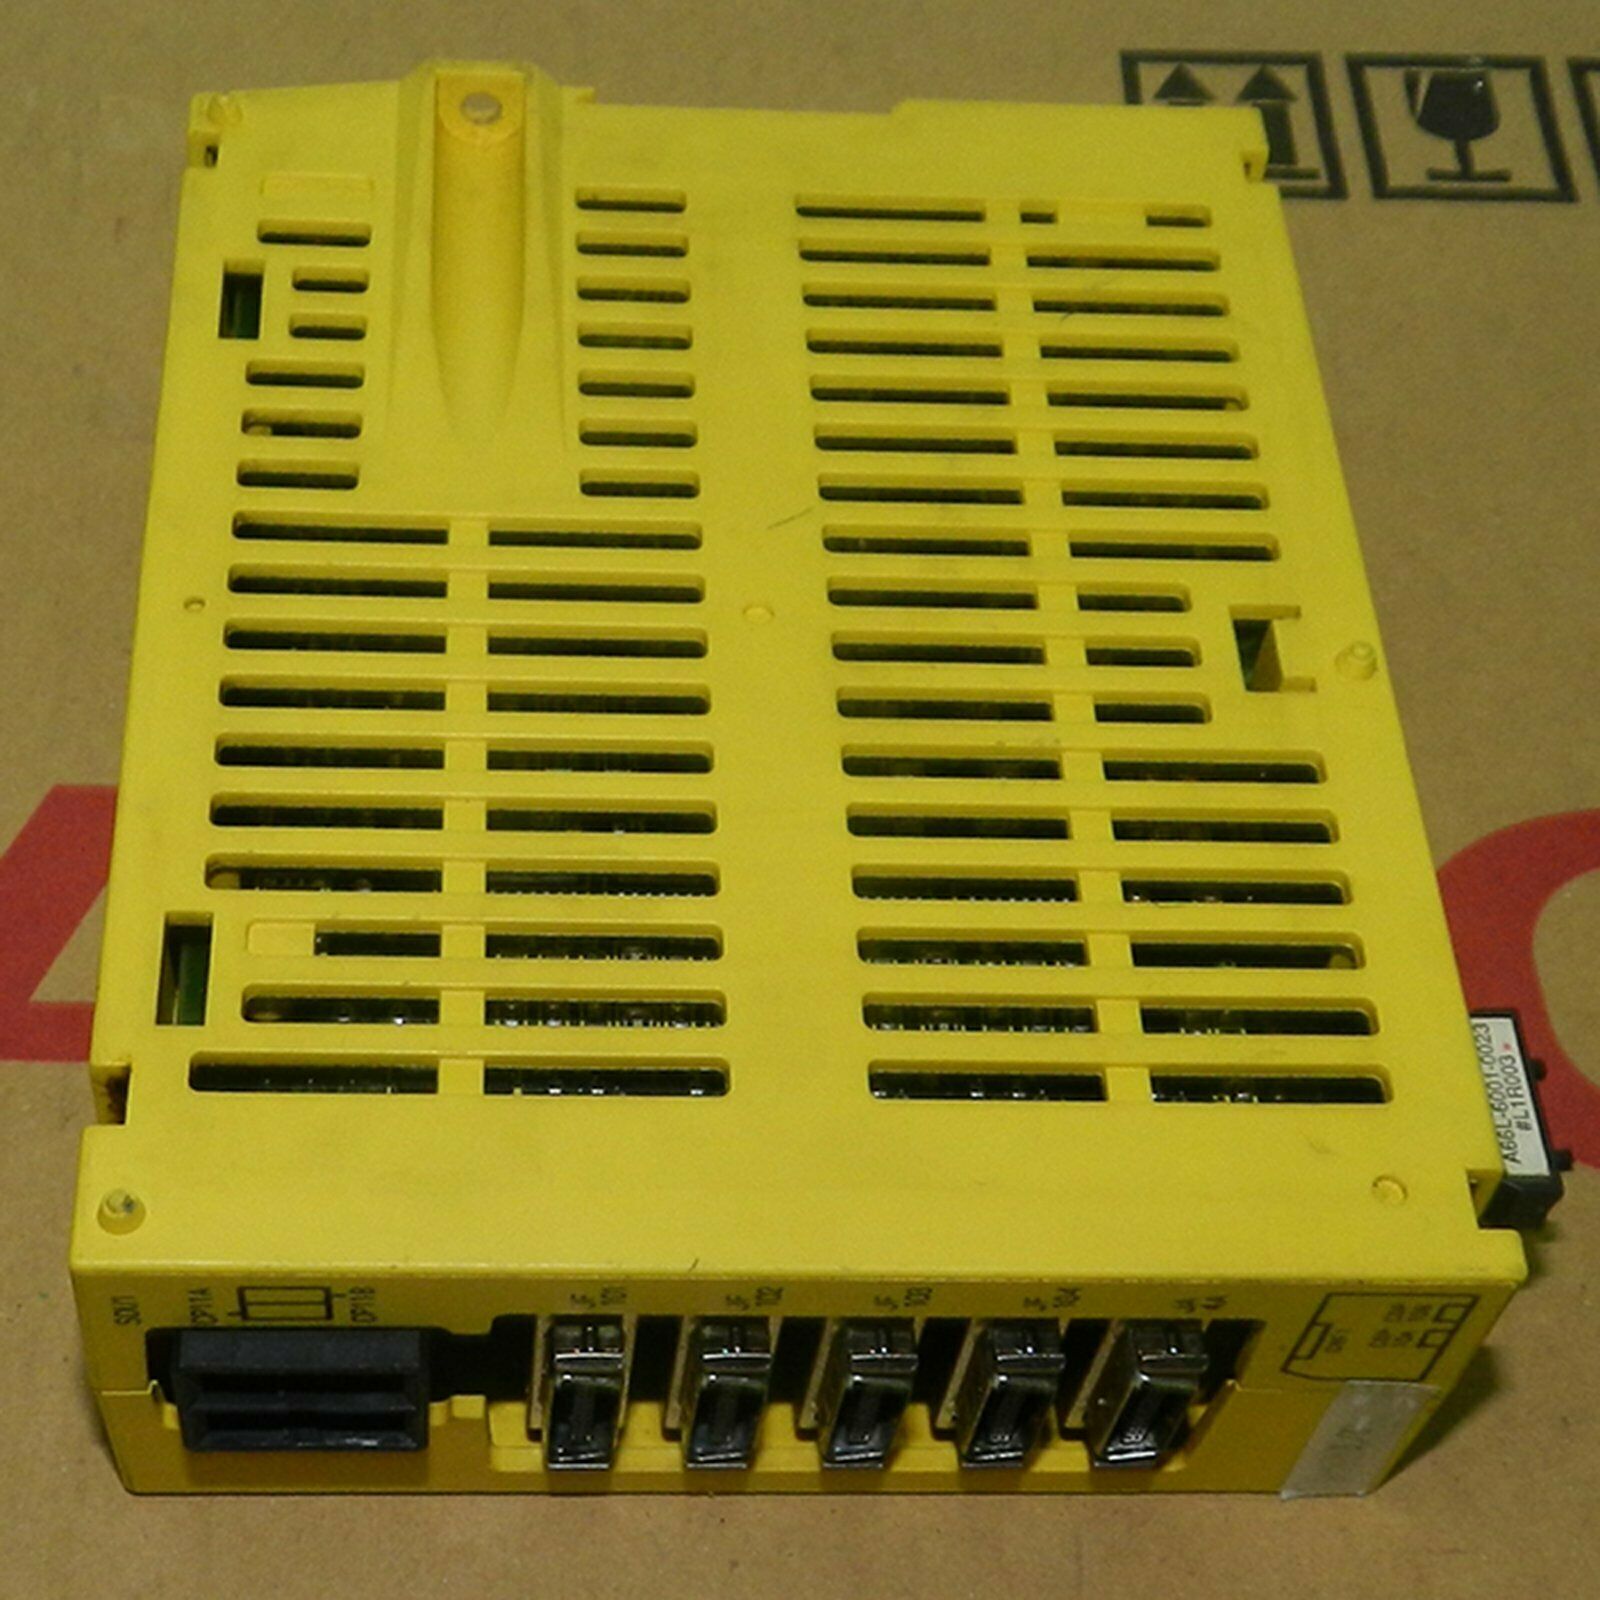 used One  For Fanuc A02B-0236-c205 IO Module Tested in Good Condition